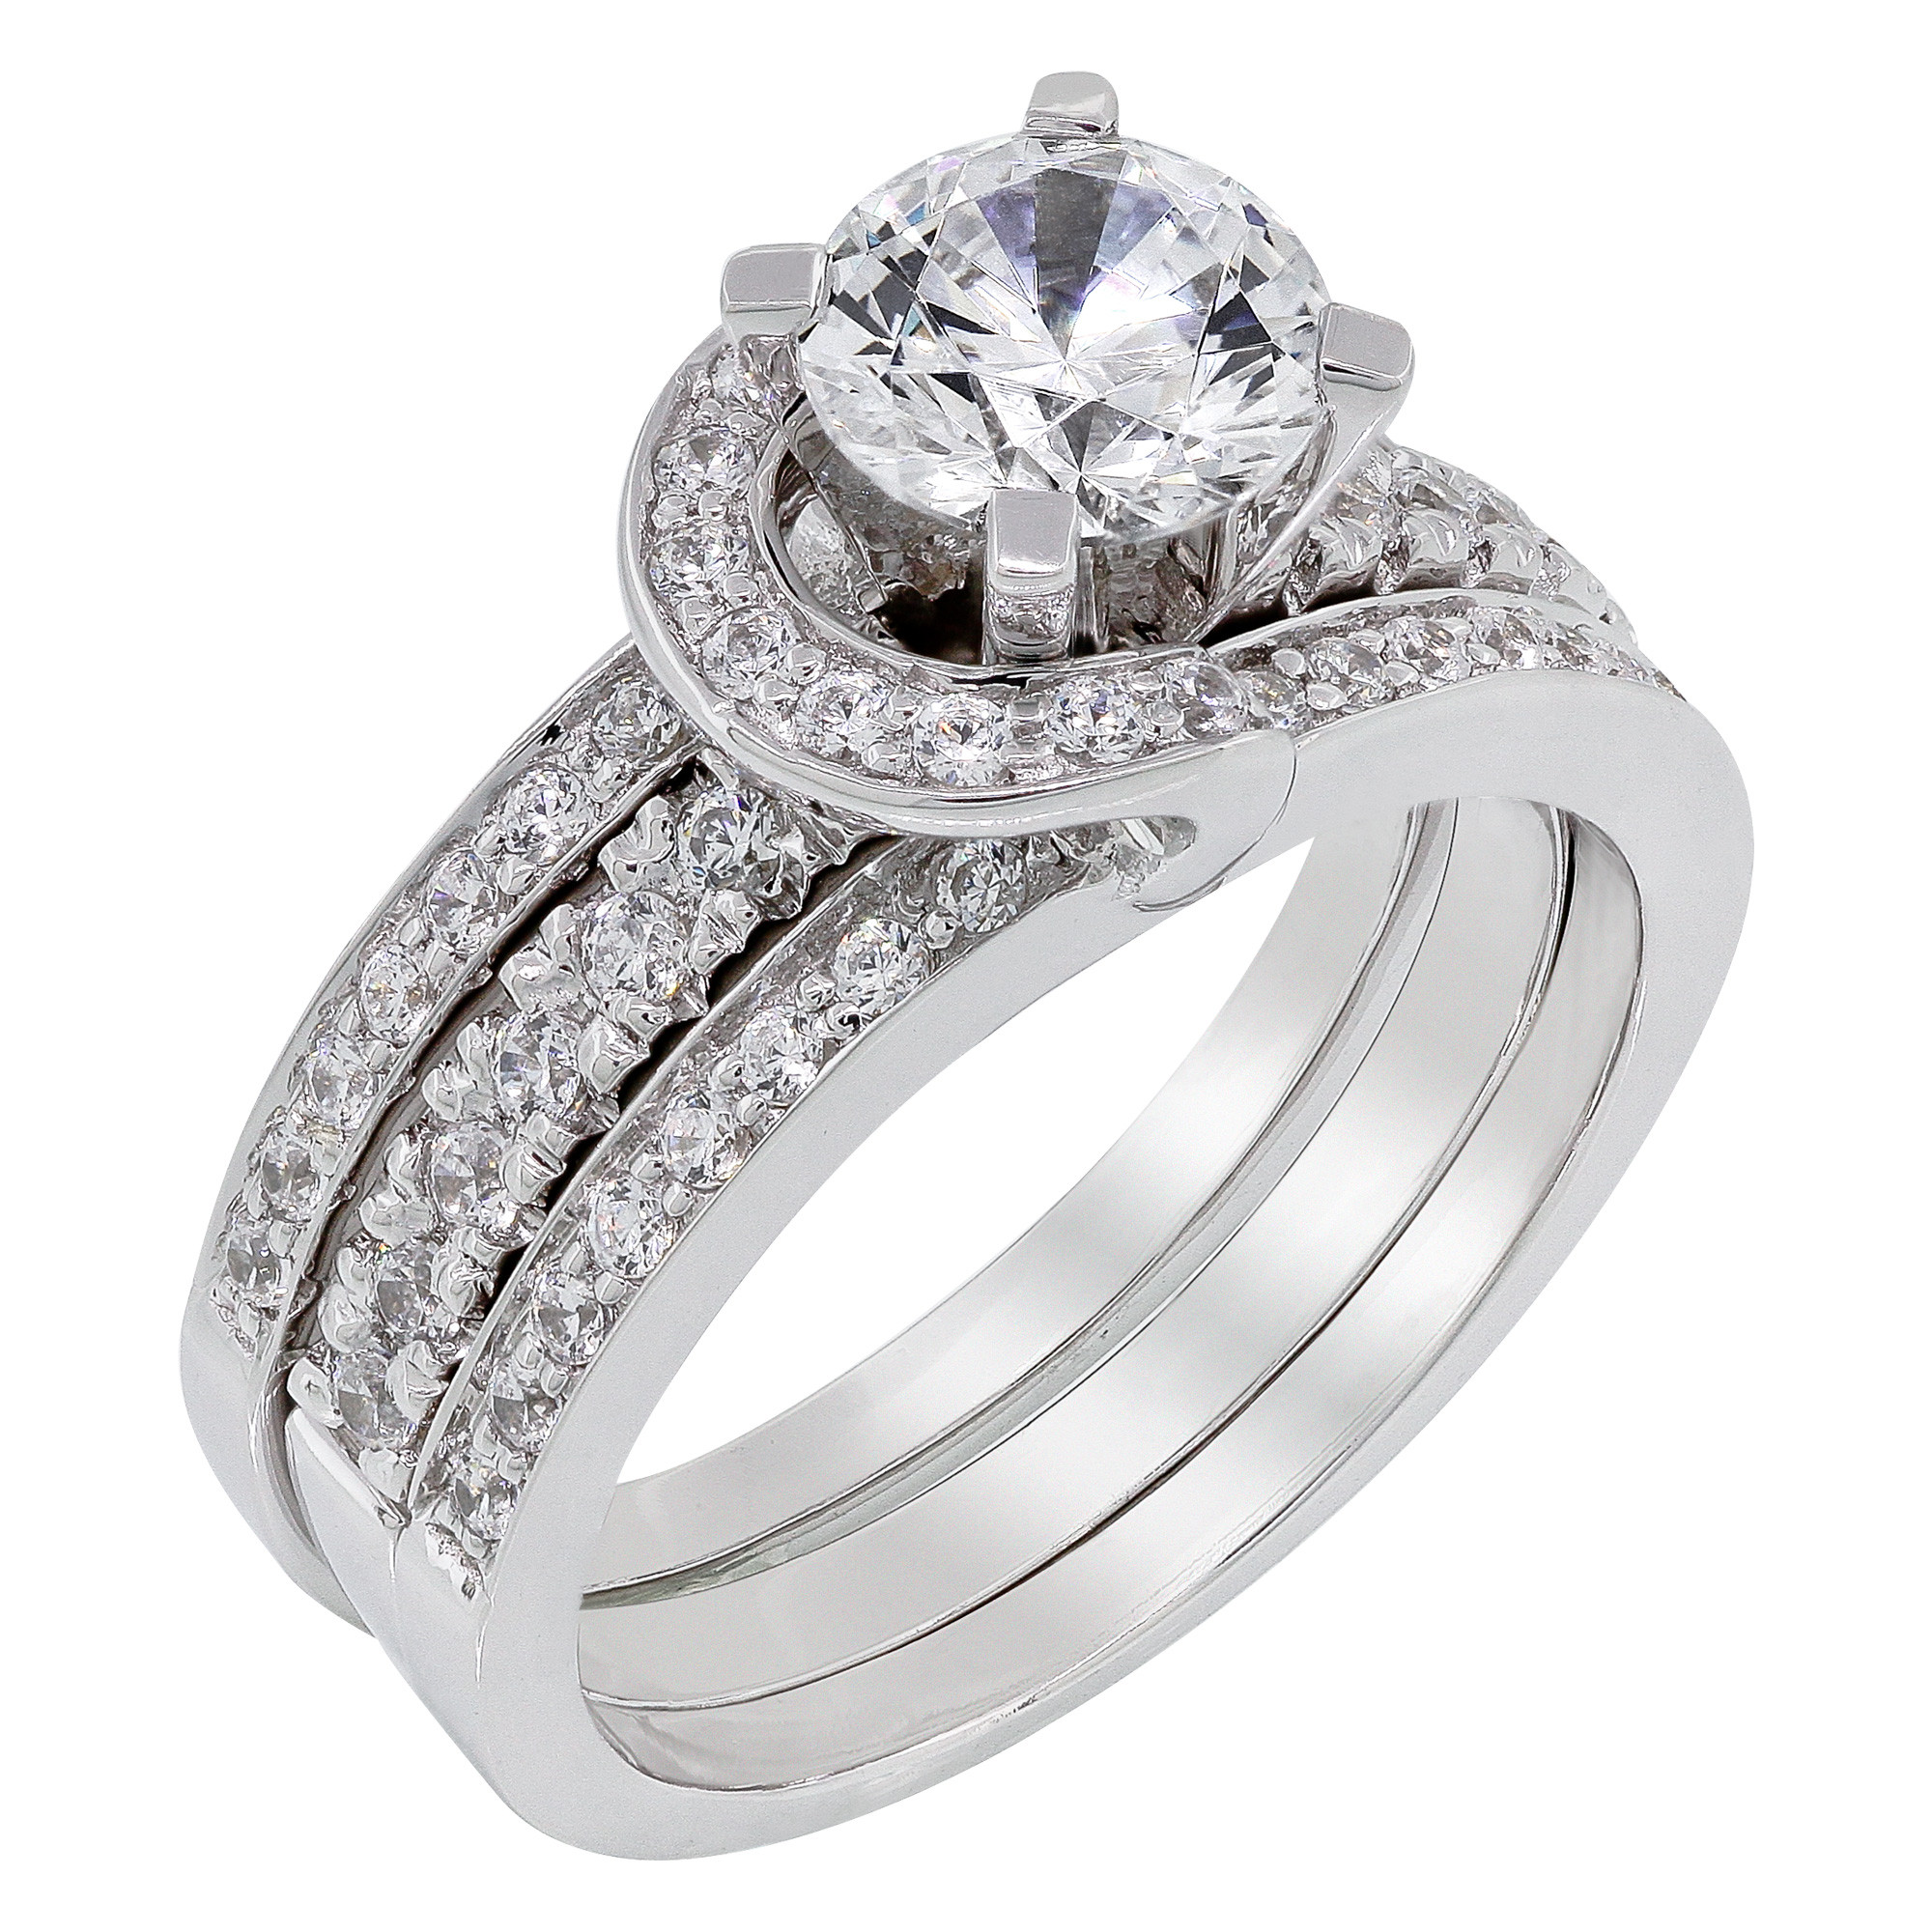 Wedding Band With Diamonds
 Diamond Nexus Introduces New Engagement Ring Collection